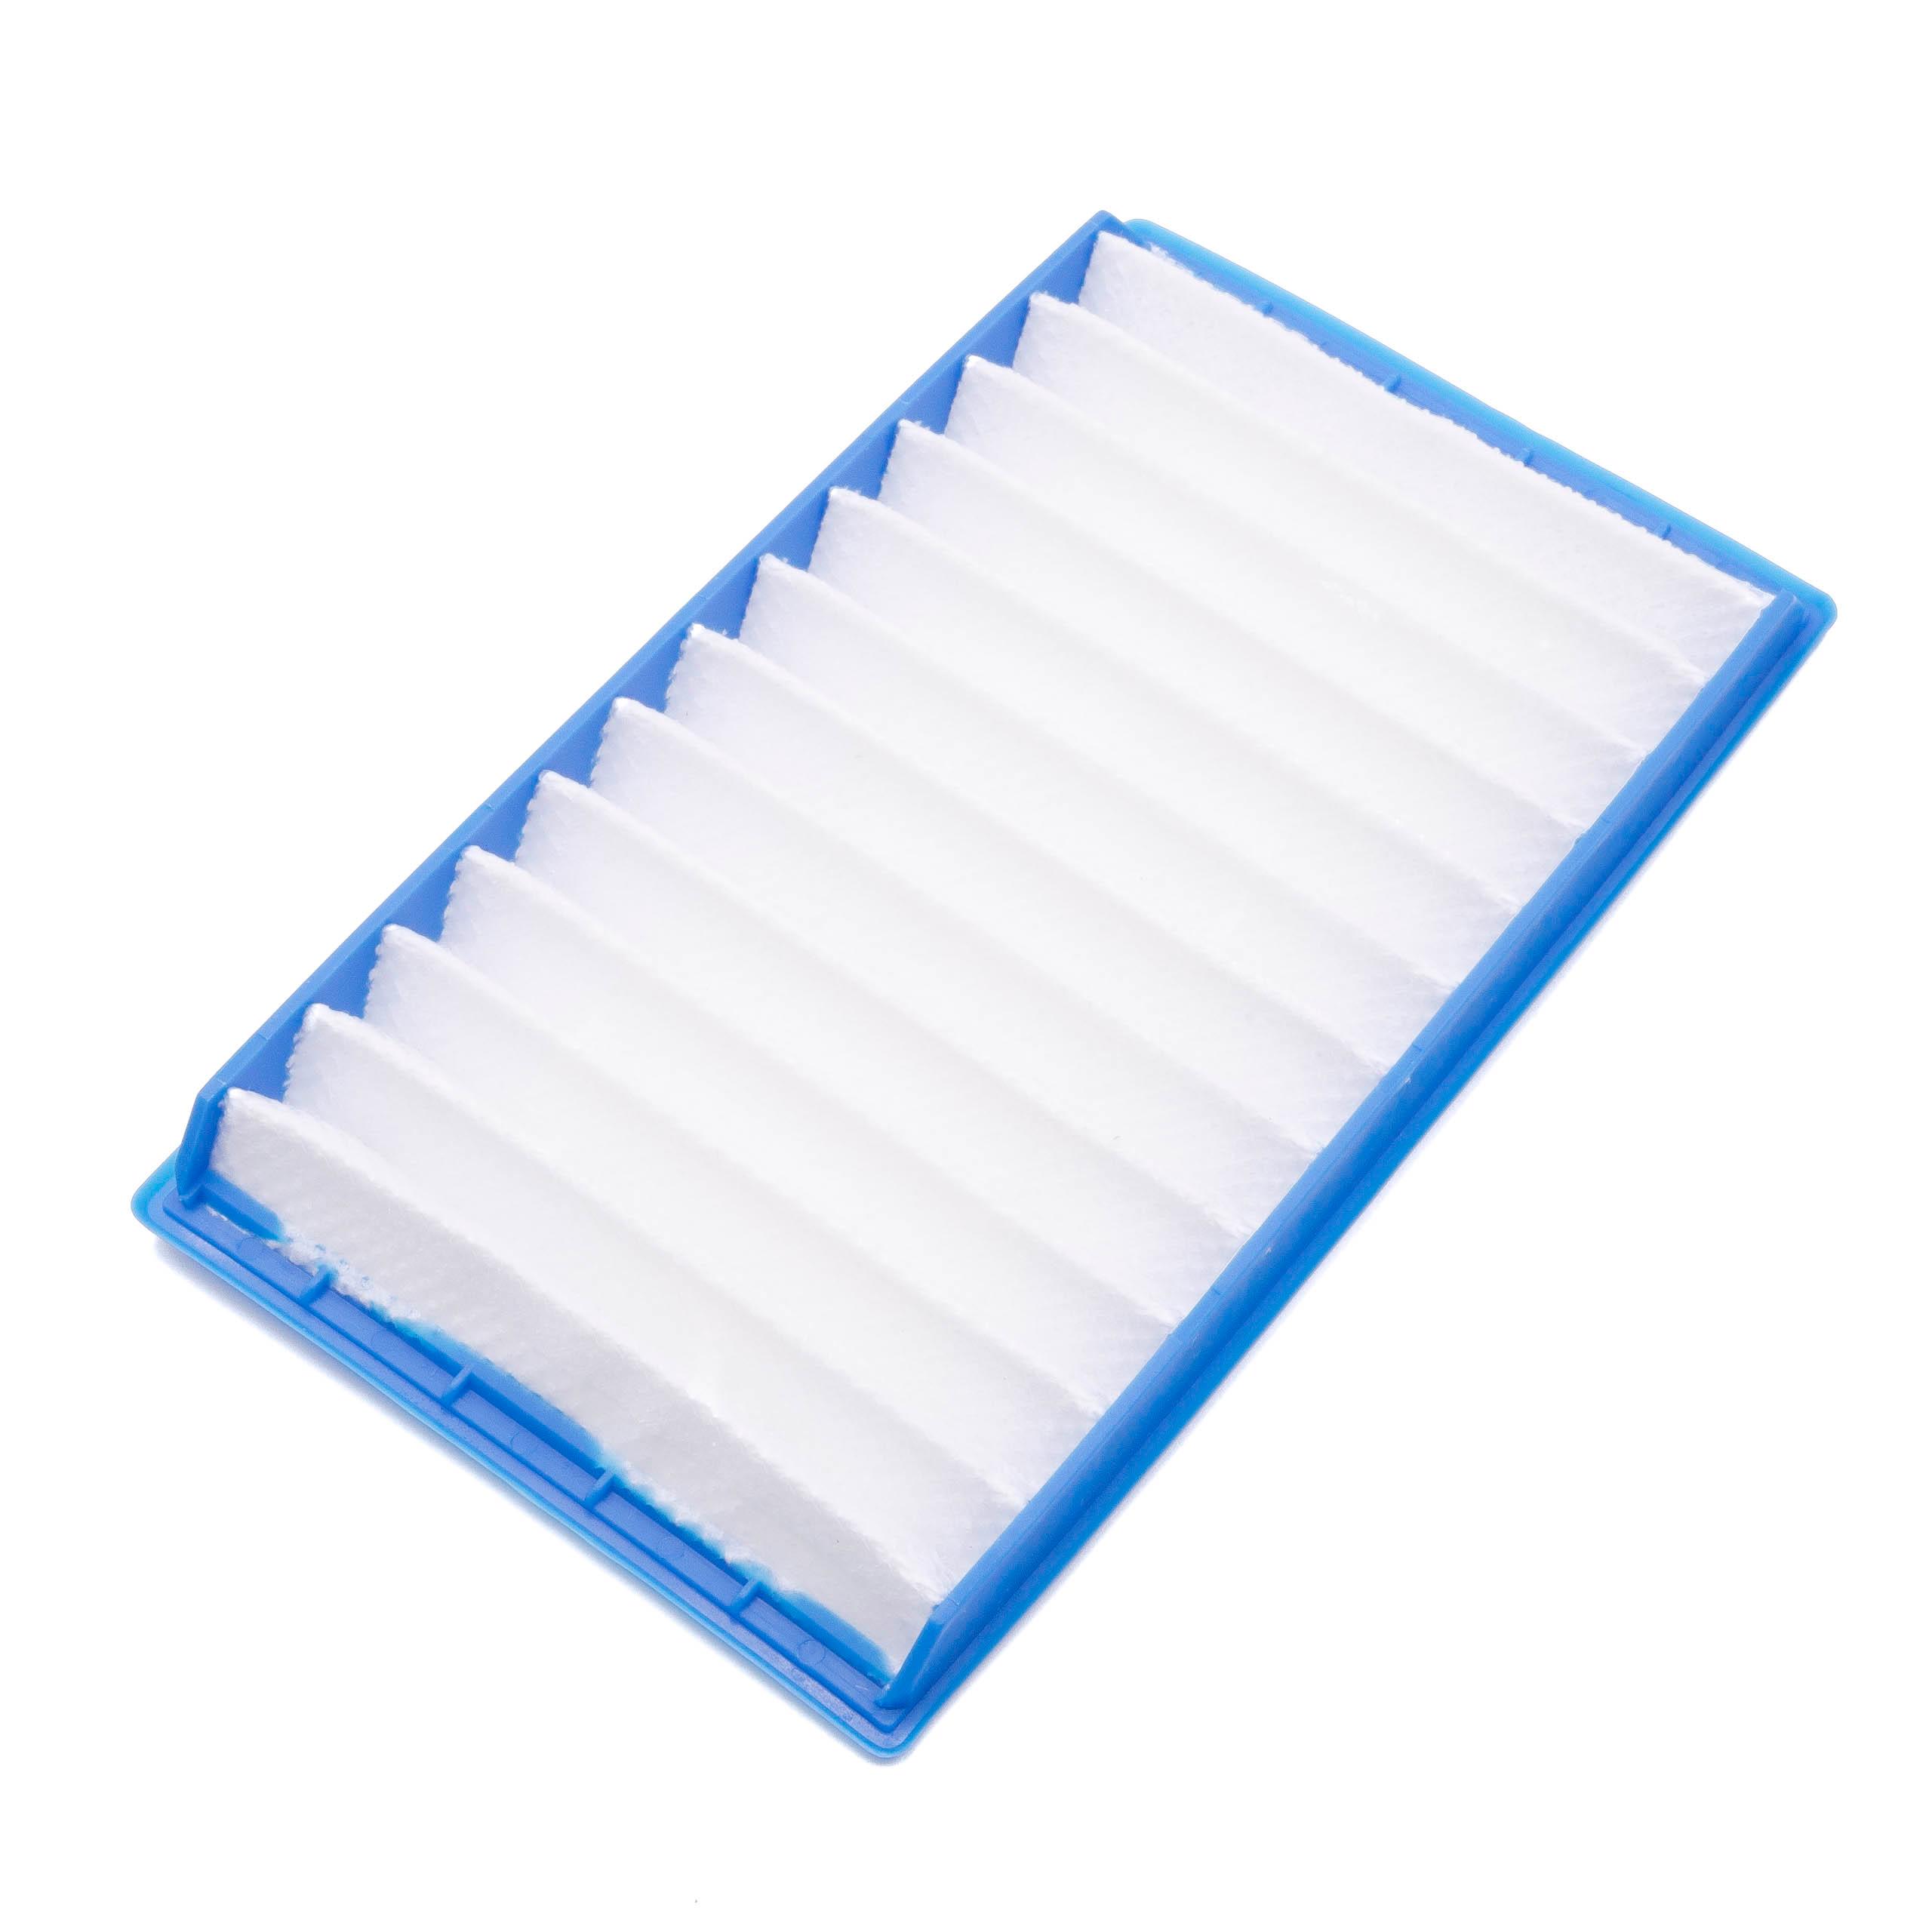 1x HEPA filter replaces Dyson 90767701, 907677-01 for DysonVacuum Cleaner